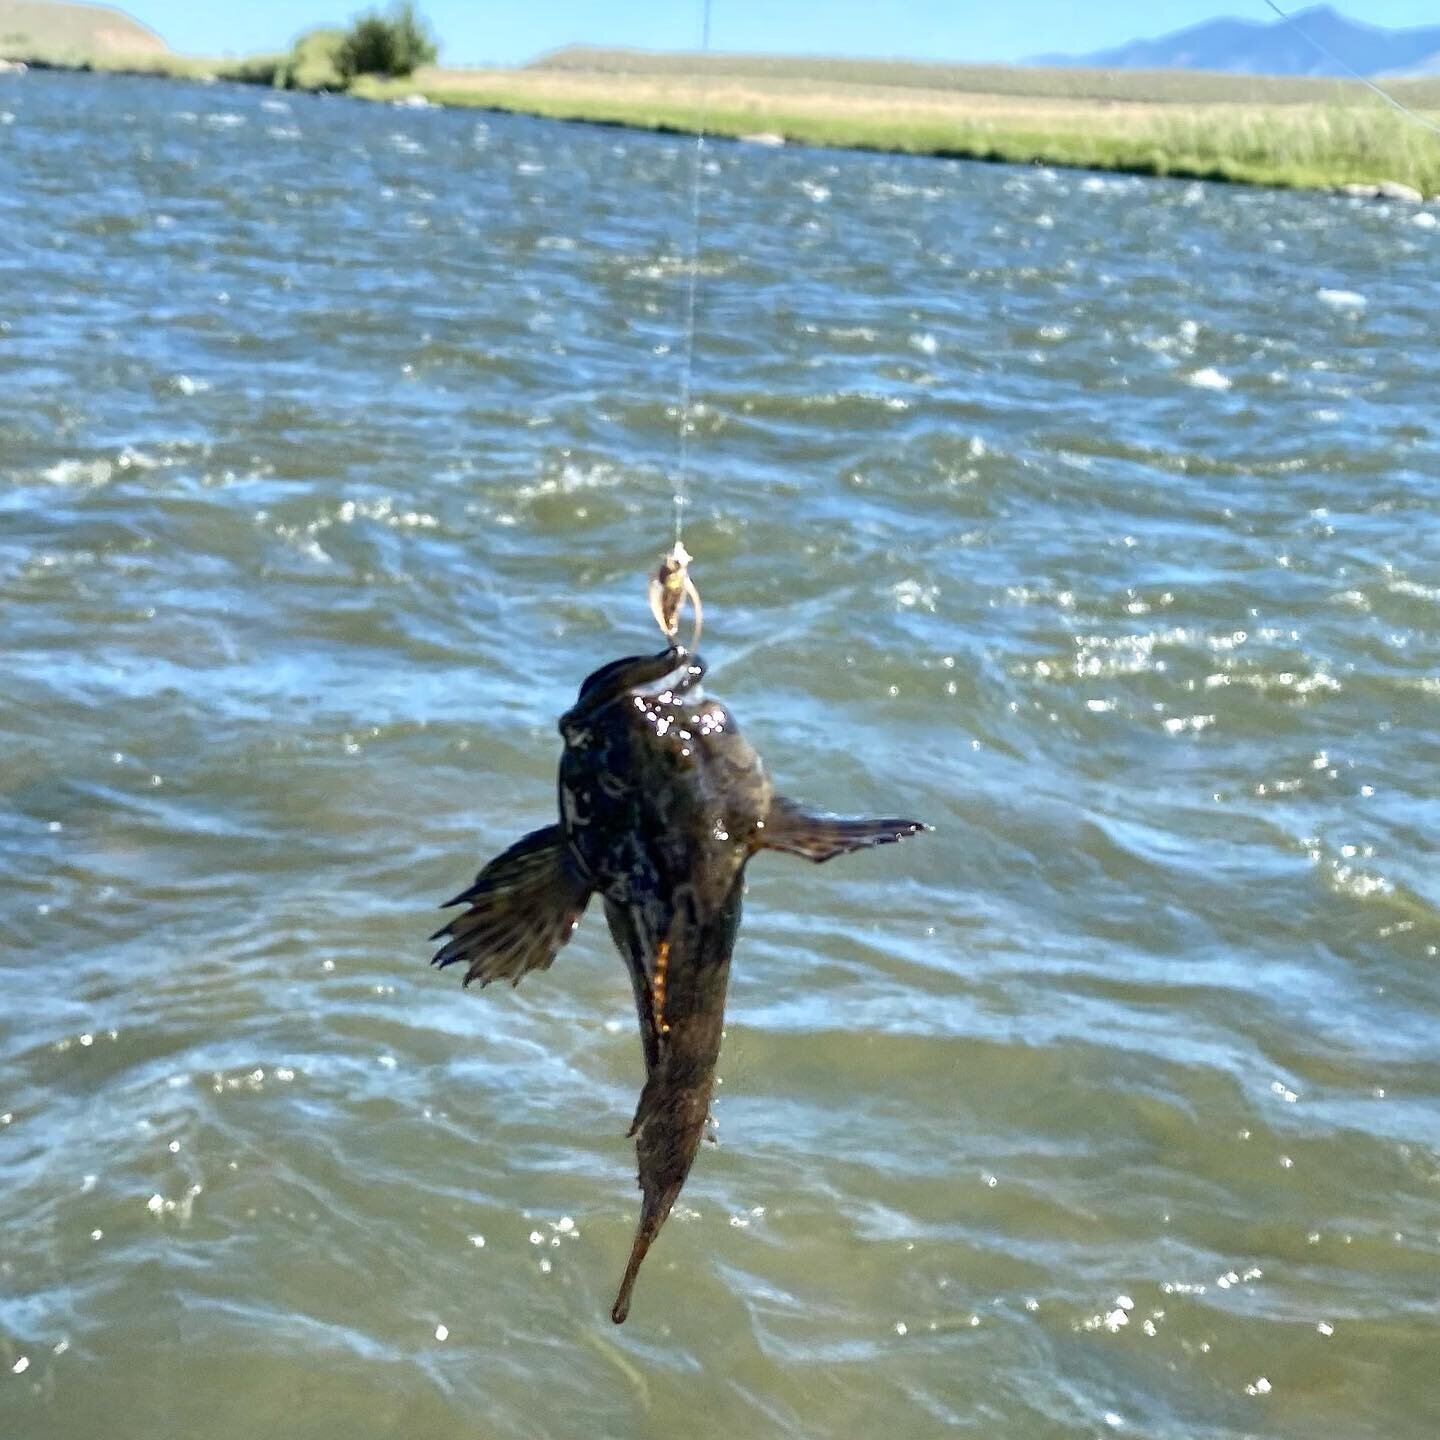 You never know what you&rsquo;re going to catch. 
#sculpin #madisonriver #fishing #flyfishing #surprisecatch #flyfishmontana406